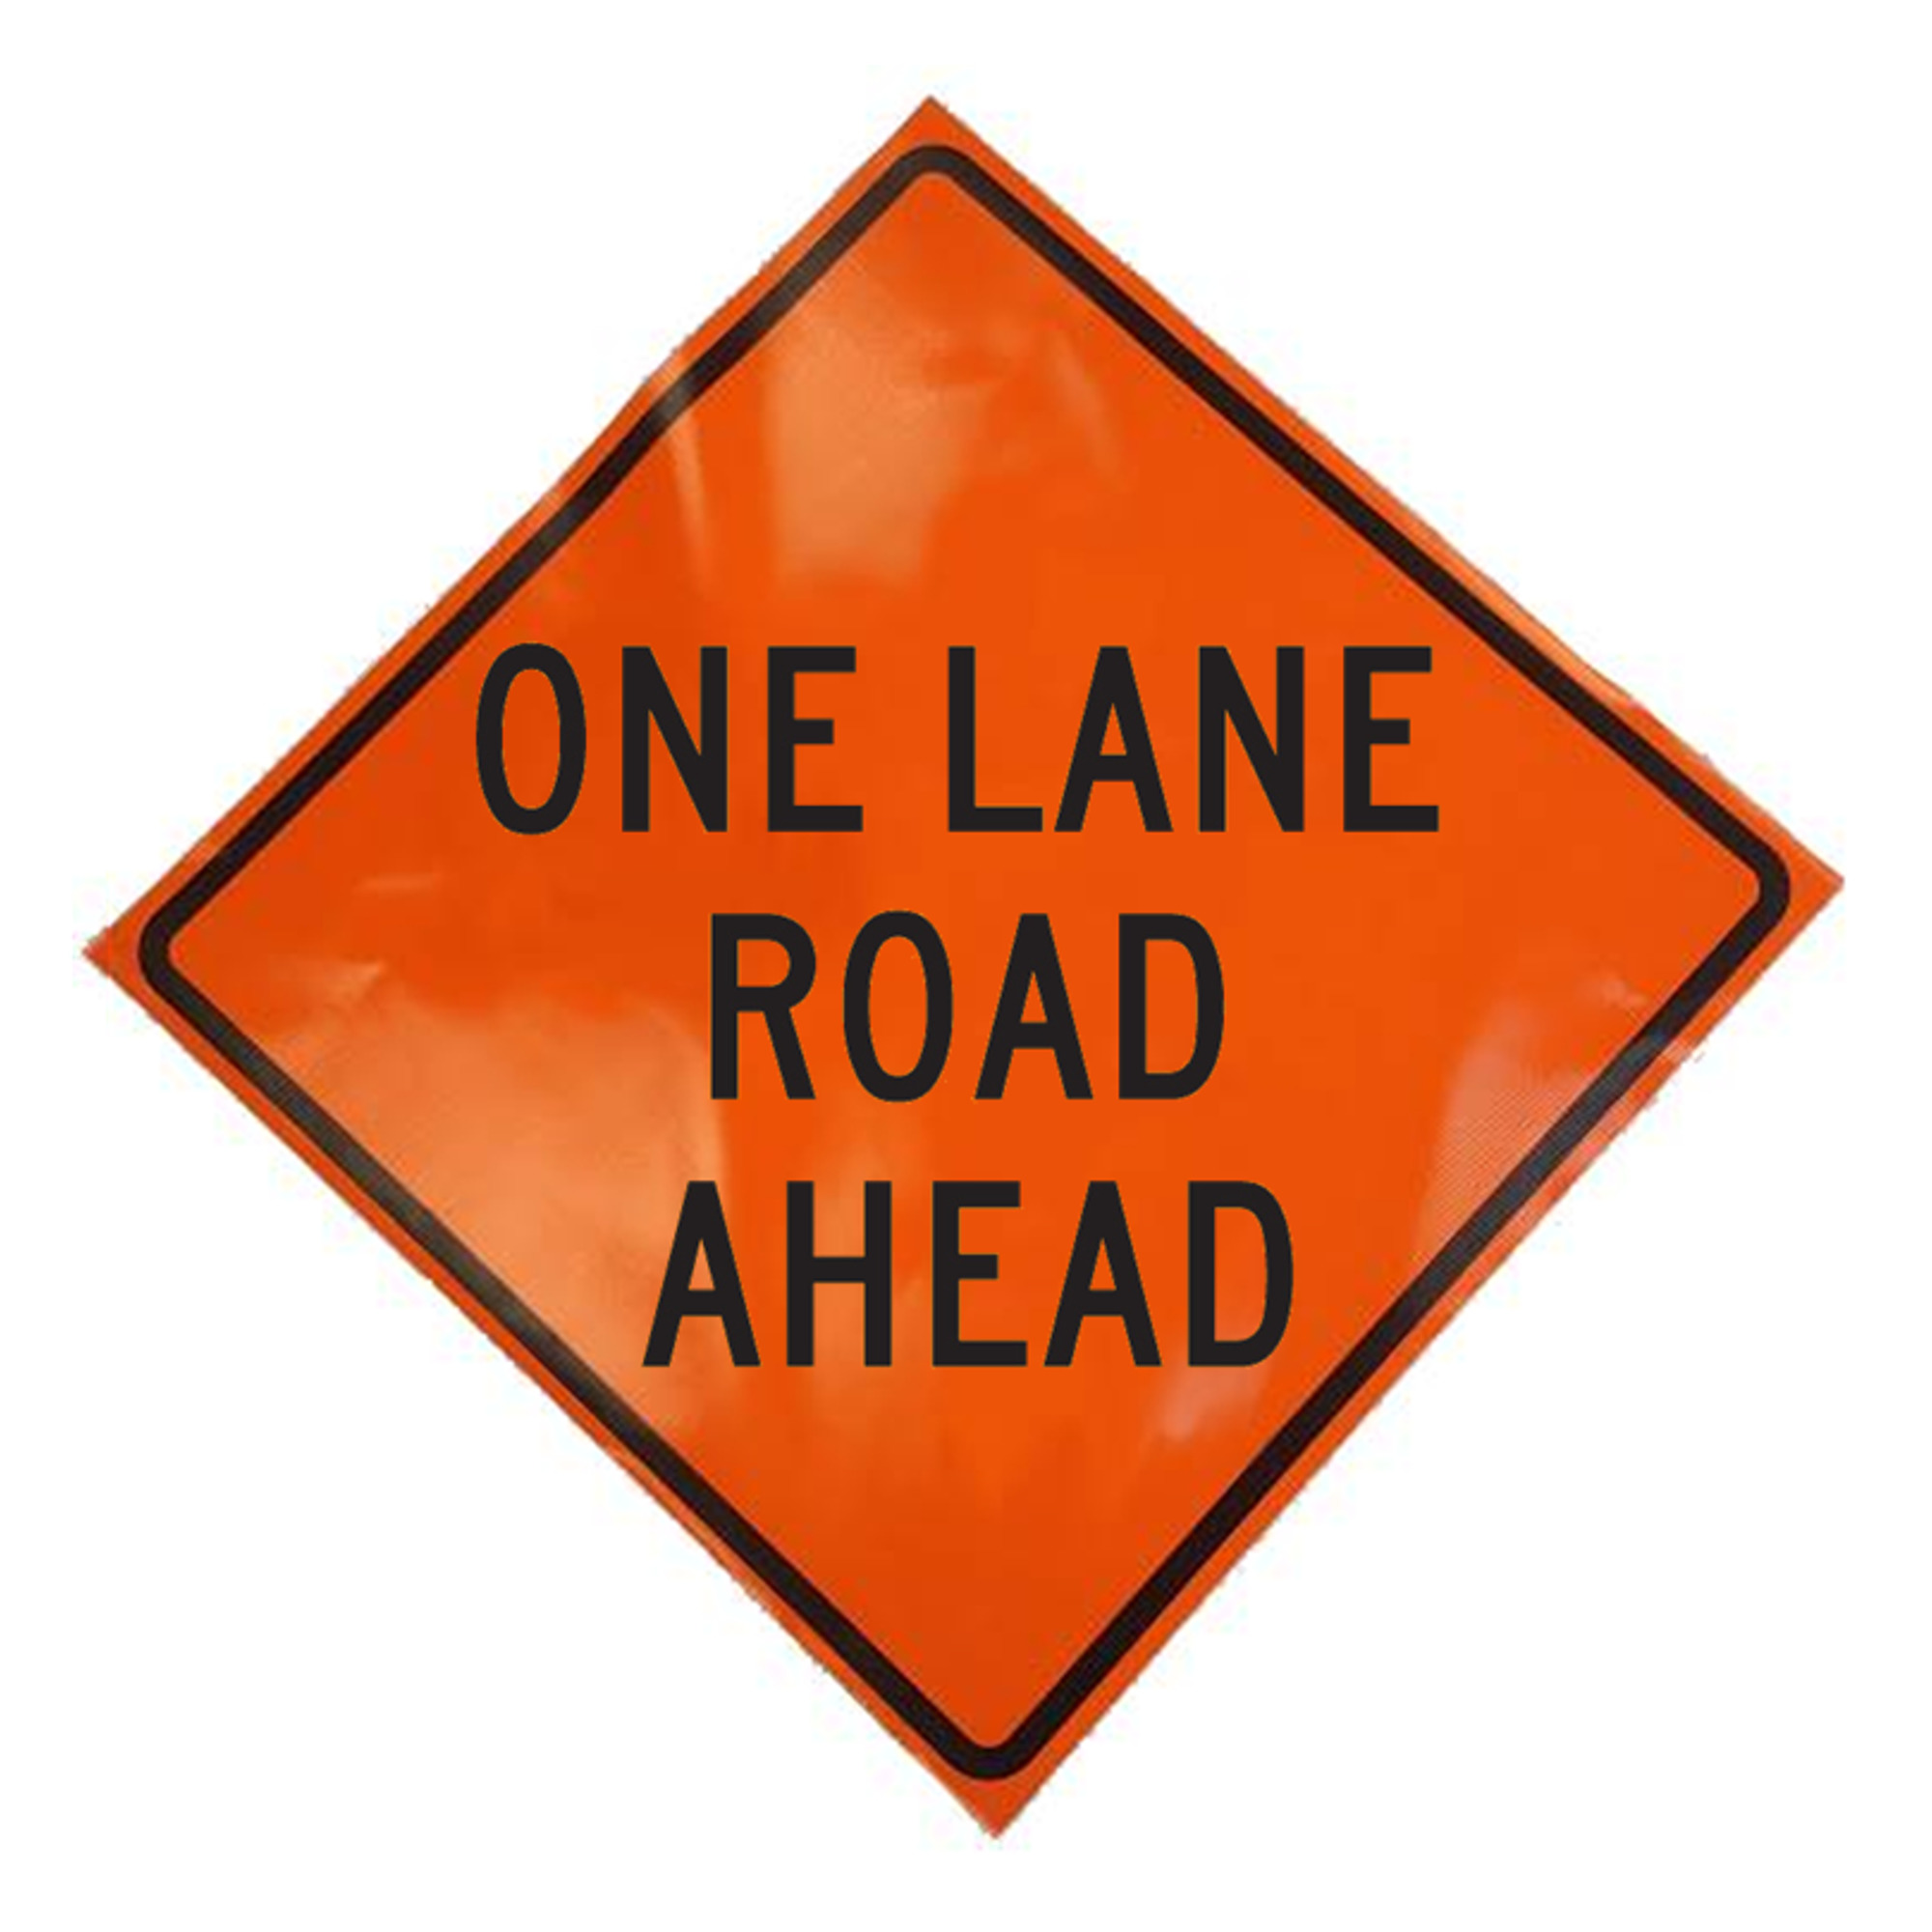 Eastern Metal, Fluorescent Vinyl Roll-up Sign, Sign Message One Lane Road Ahead, Height 48 in, Width 48 in, Model C-48-NRFVO-4LEX-OLRA